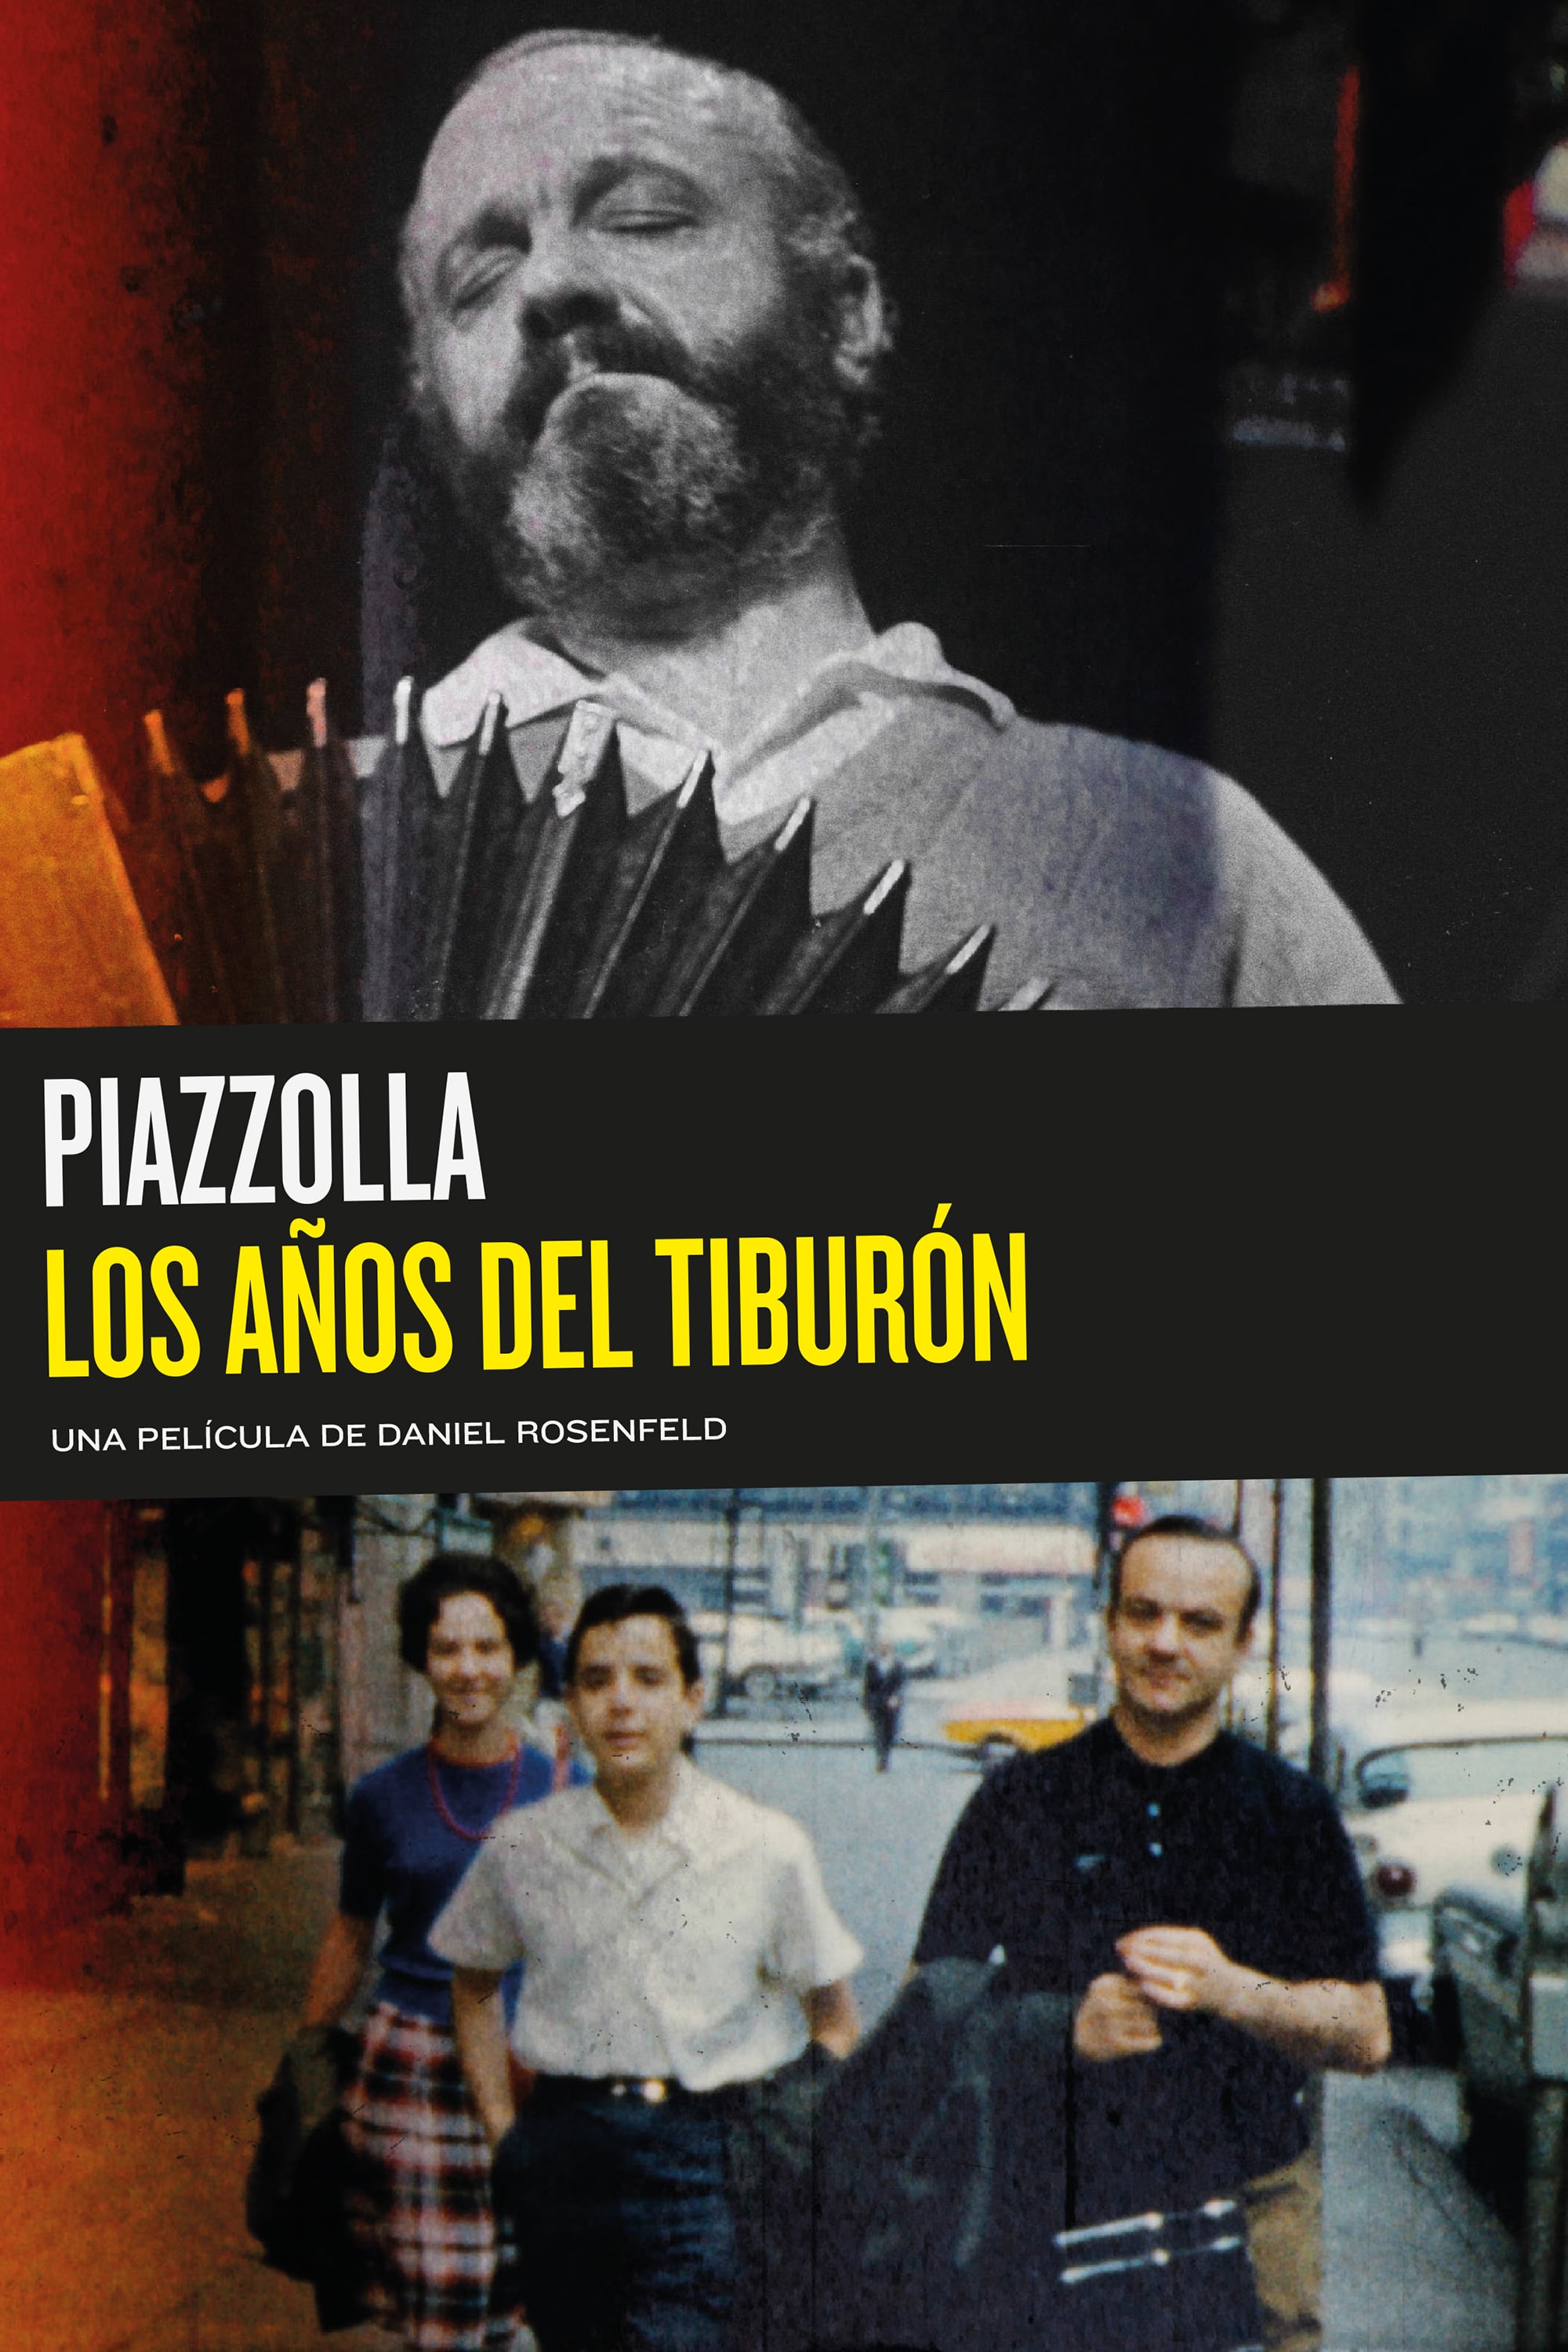 Piazzolla: The Years of the Shark